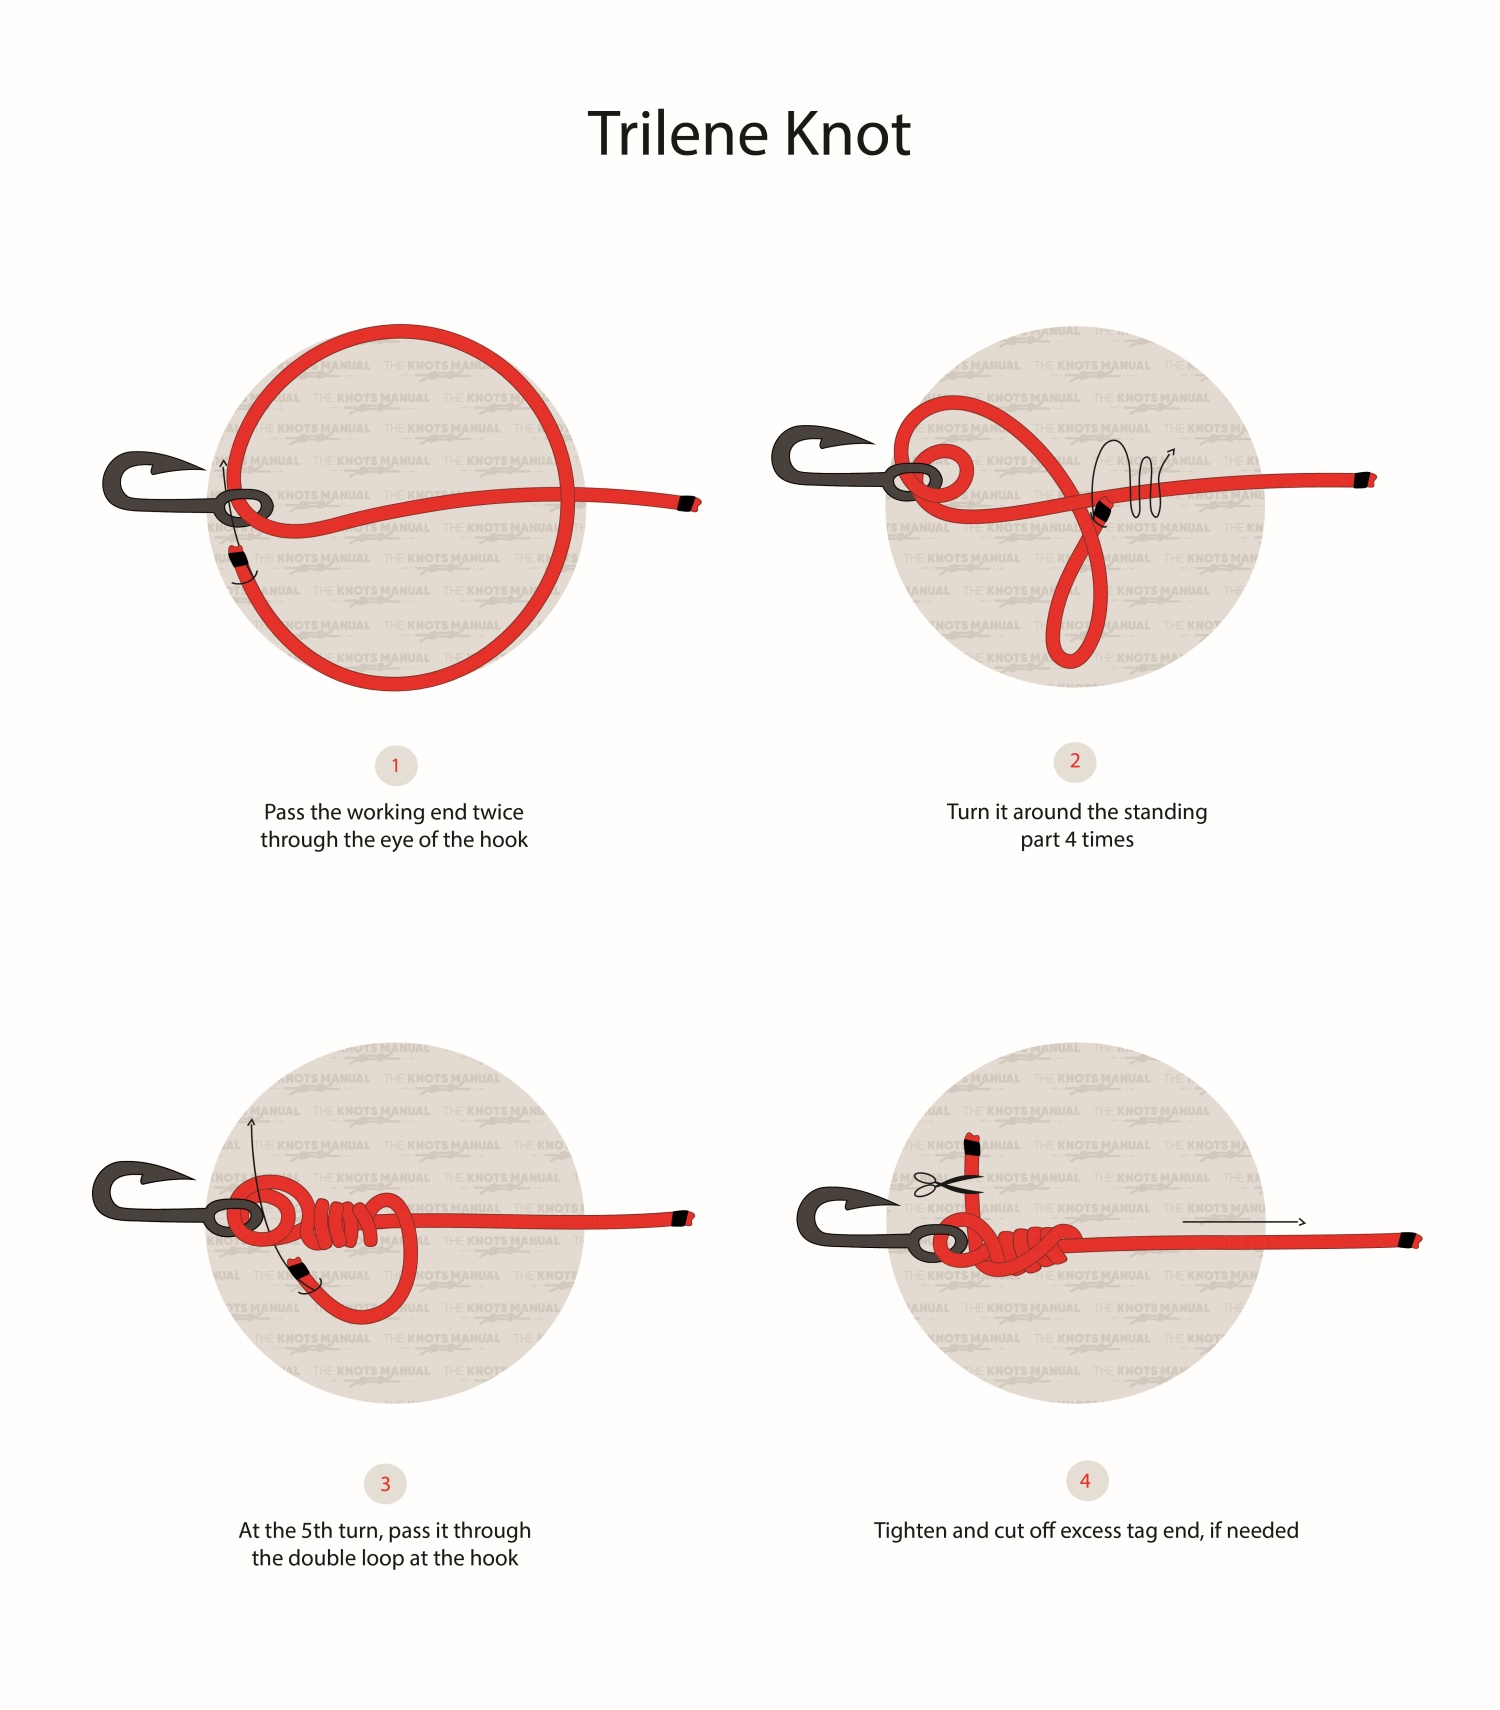 How to Tie the Trilene Knot (Illustrated Guide)